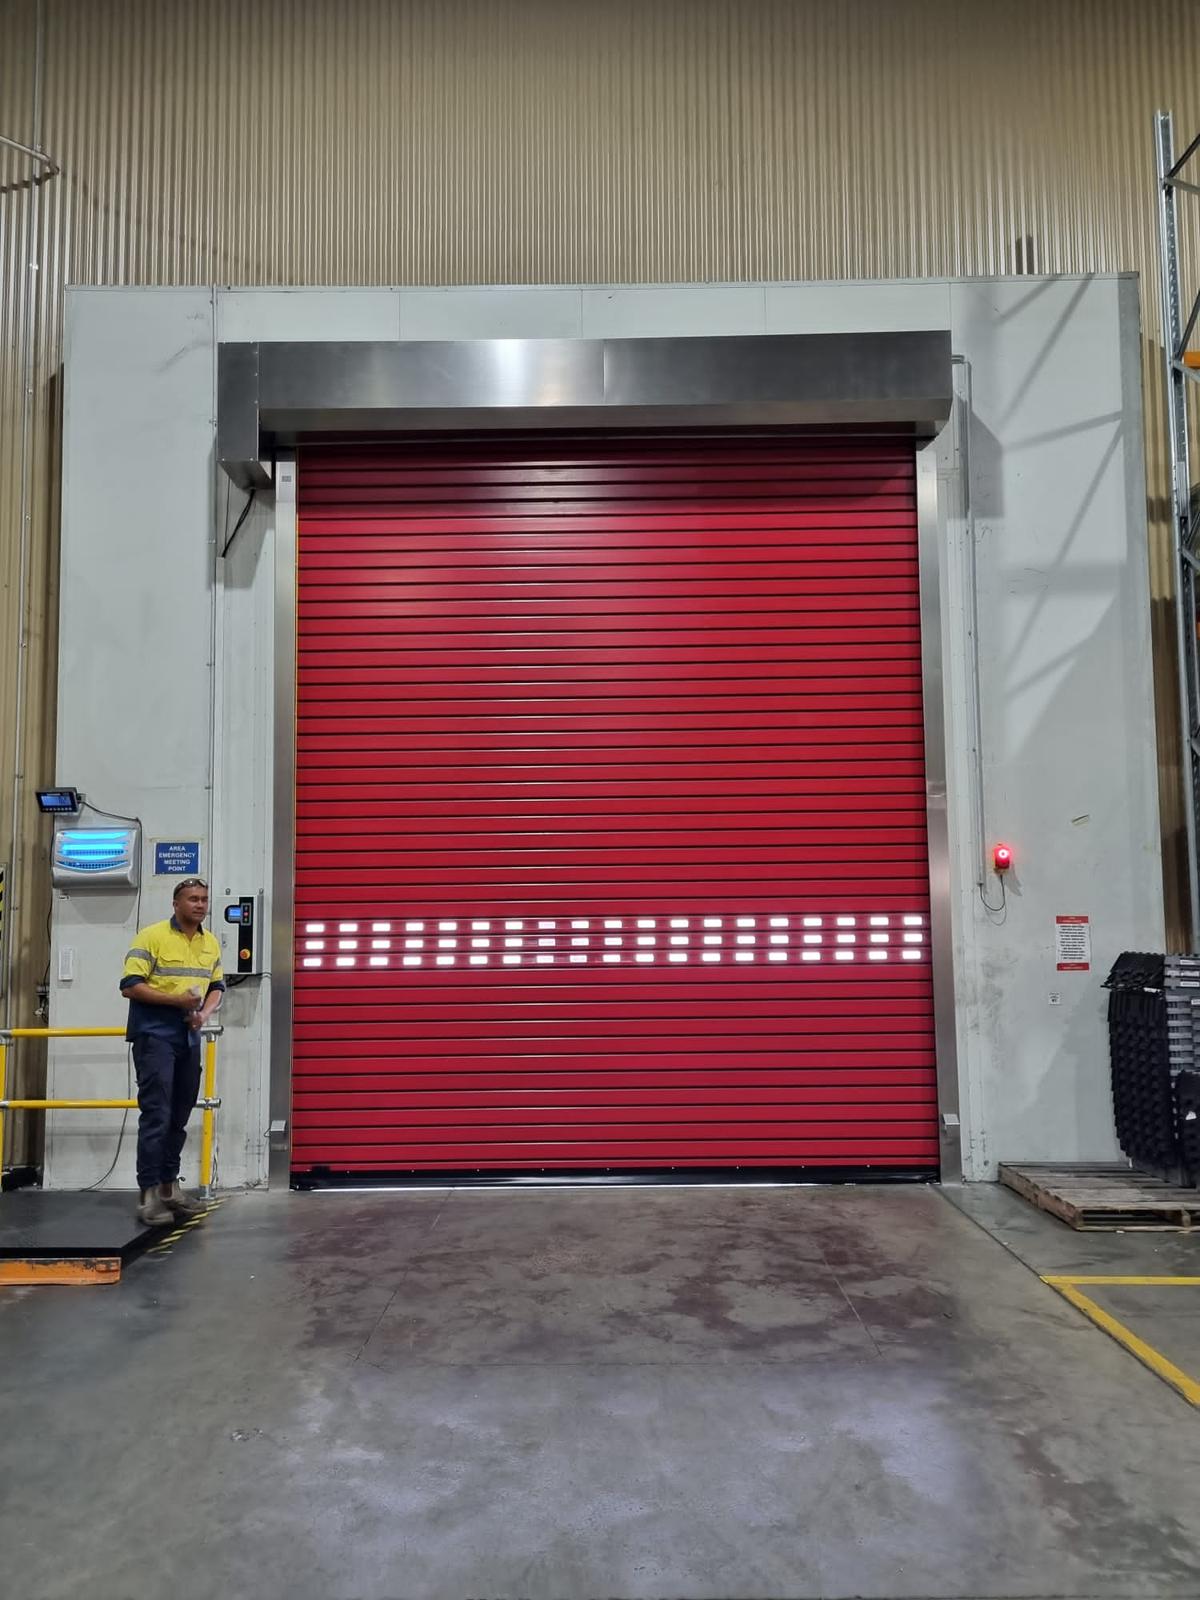 High-speed secure door at pharmaceutical supply chain facility.